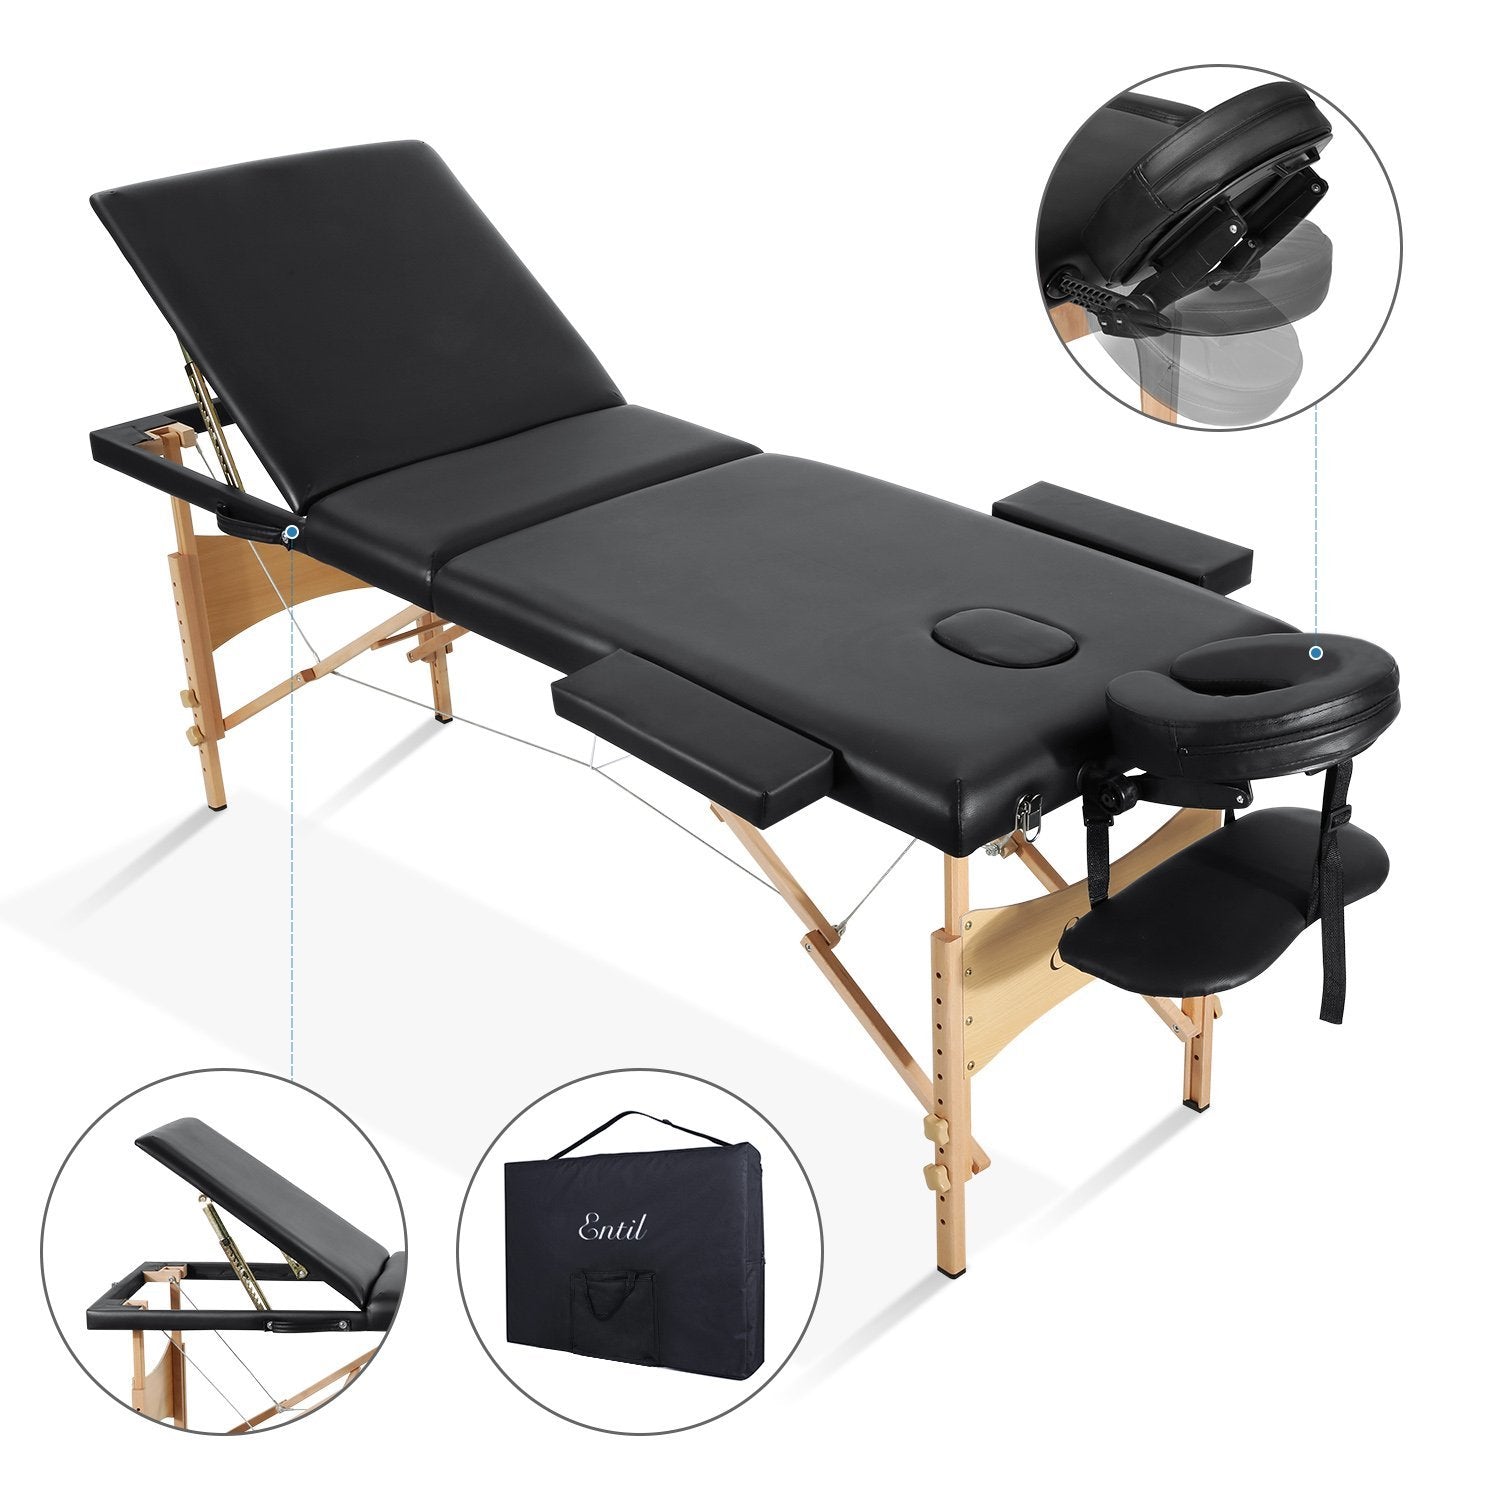 Load image into Gallery viewer, Entil Massage Table Spa Bed Portable 3 Sections Wooden Legs with Face Hole Carrying Bag - NAIPO
